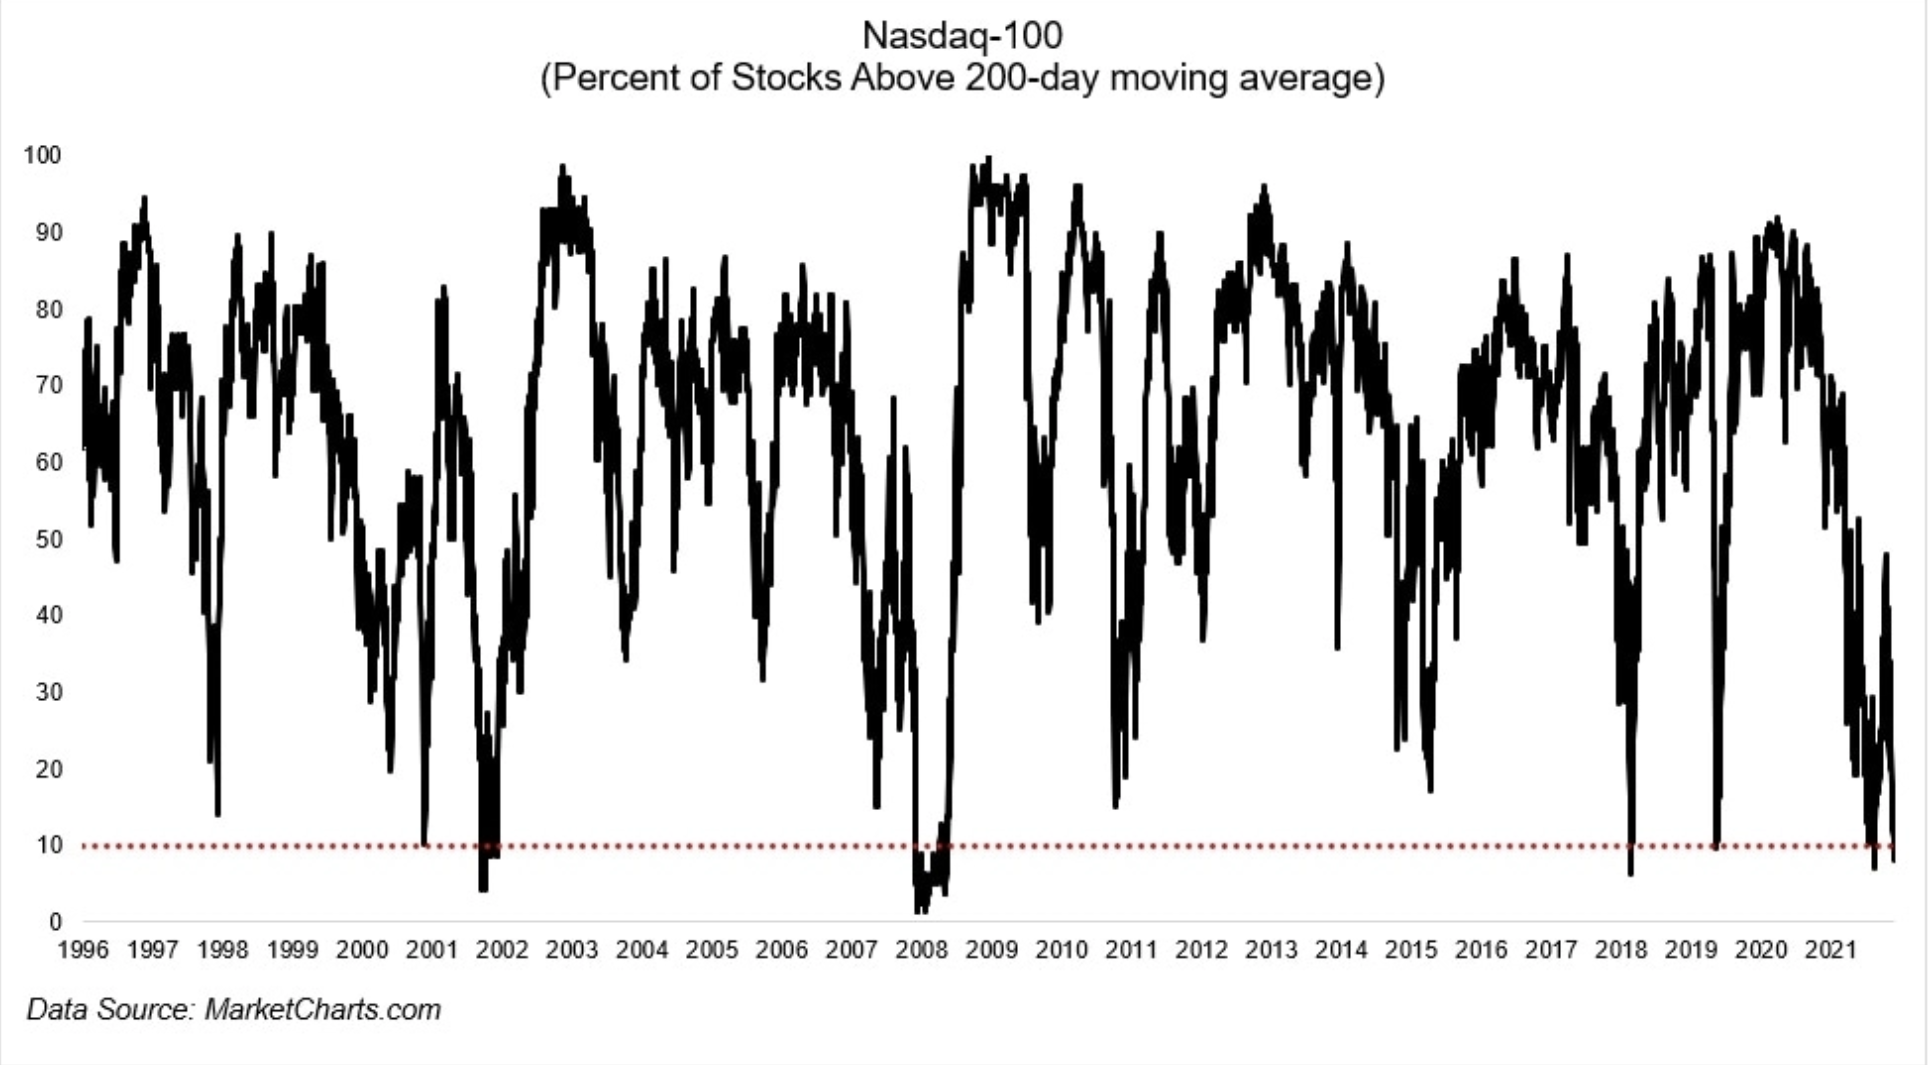 Percent Of Nasdaq 100 Stocks Above Their 200-Day Moving Average